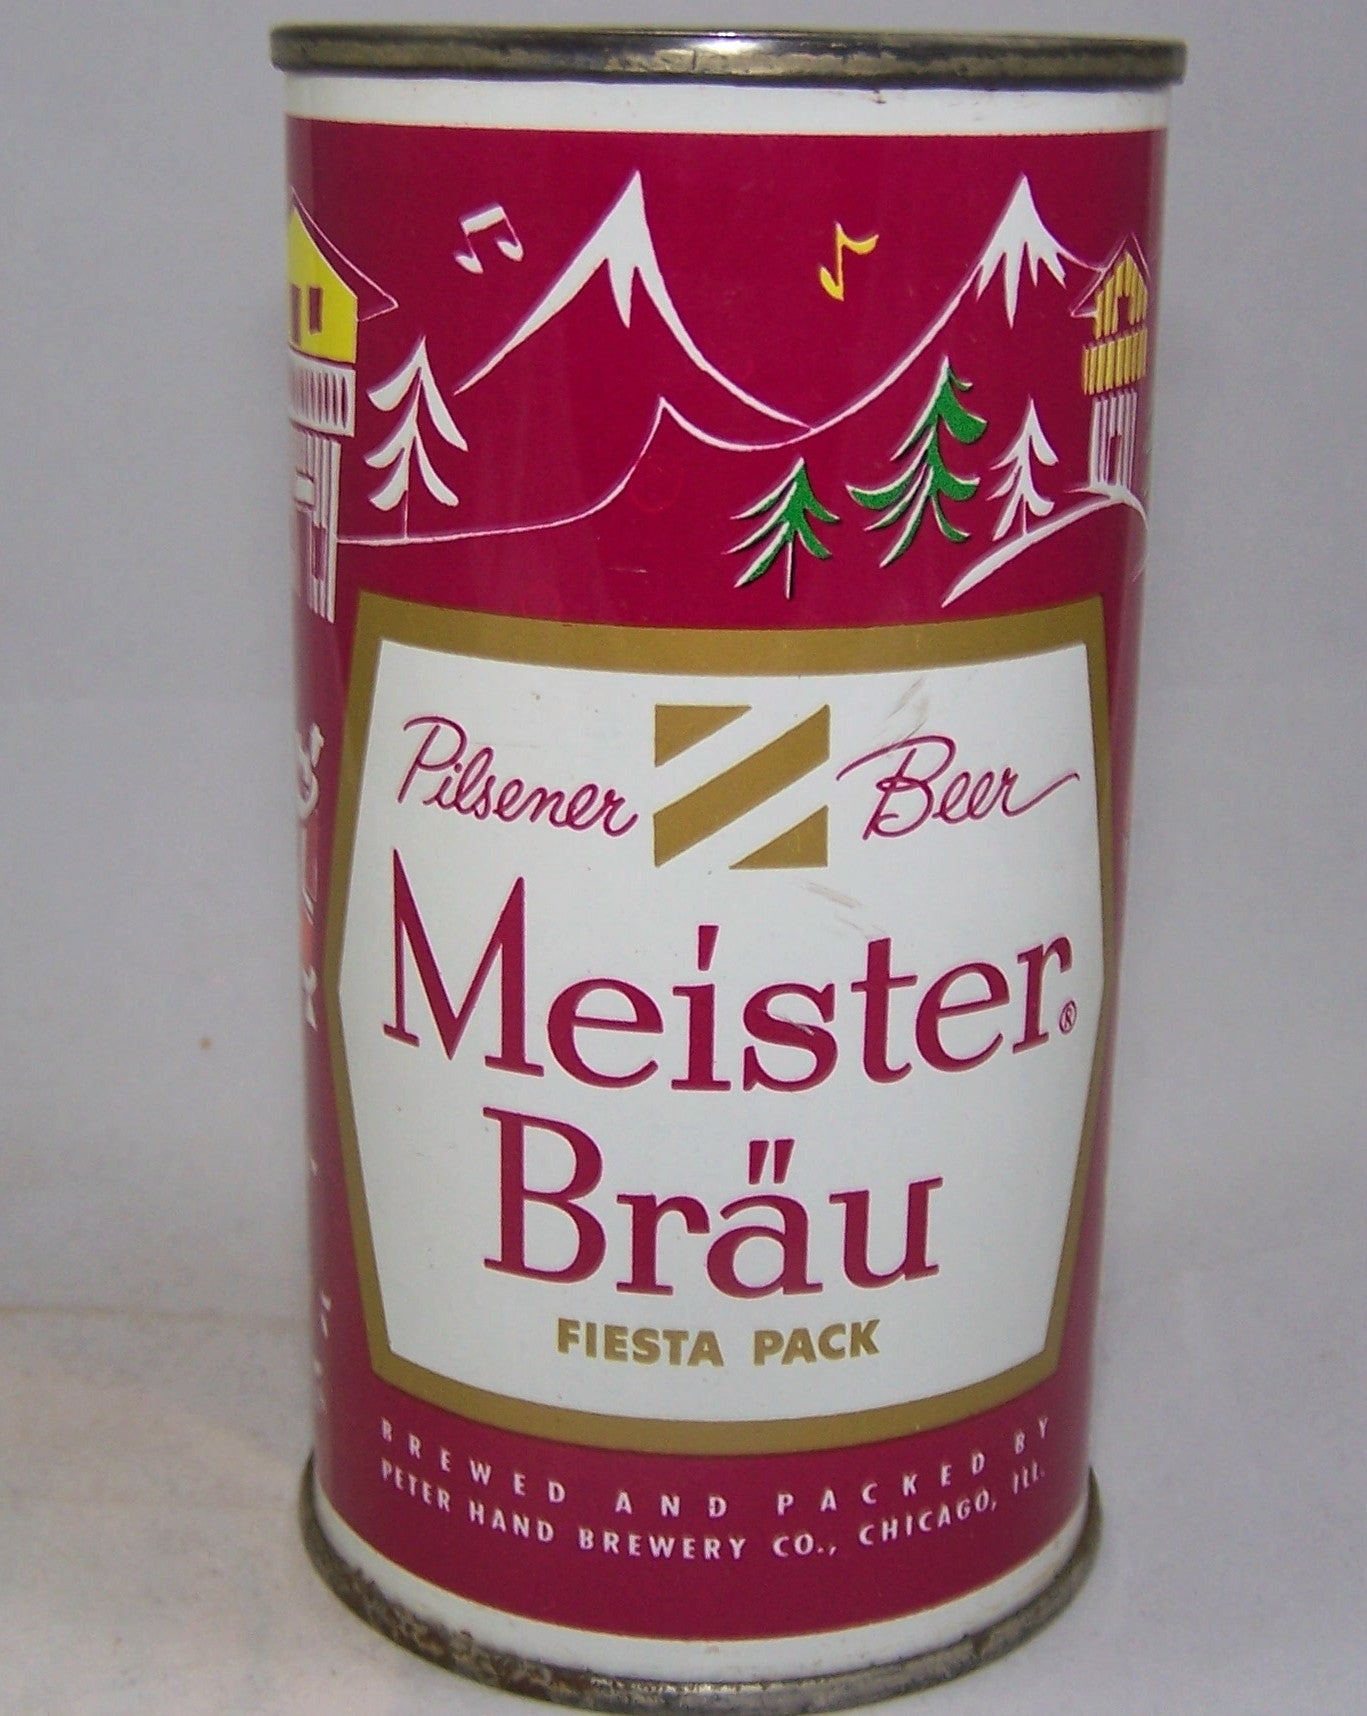 Meister Brau Pilsener Beer, Country Can, (Switzerland) USBC 97-16, Grade A1+ Sold on 10/22/15